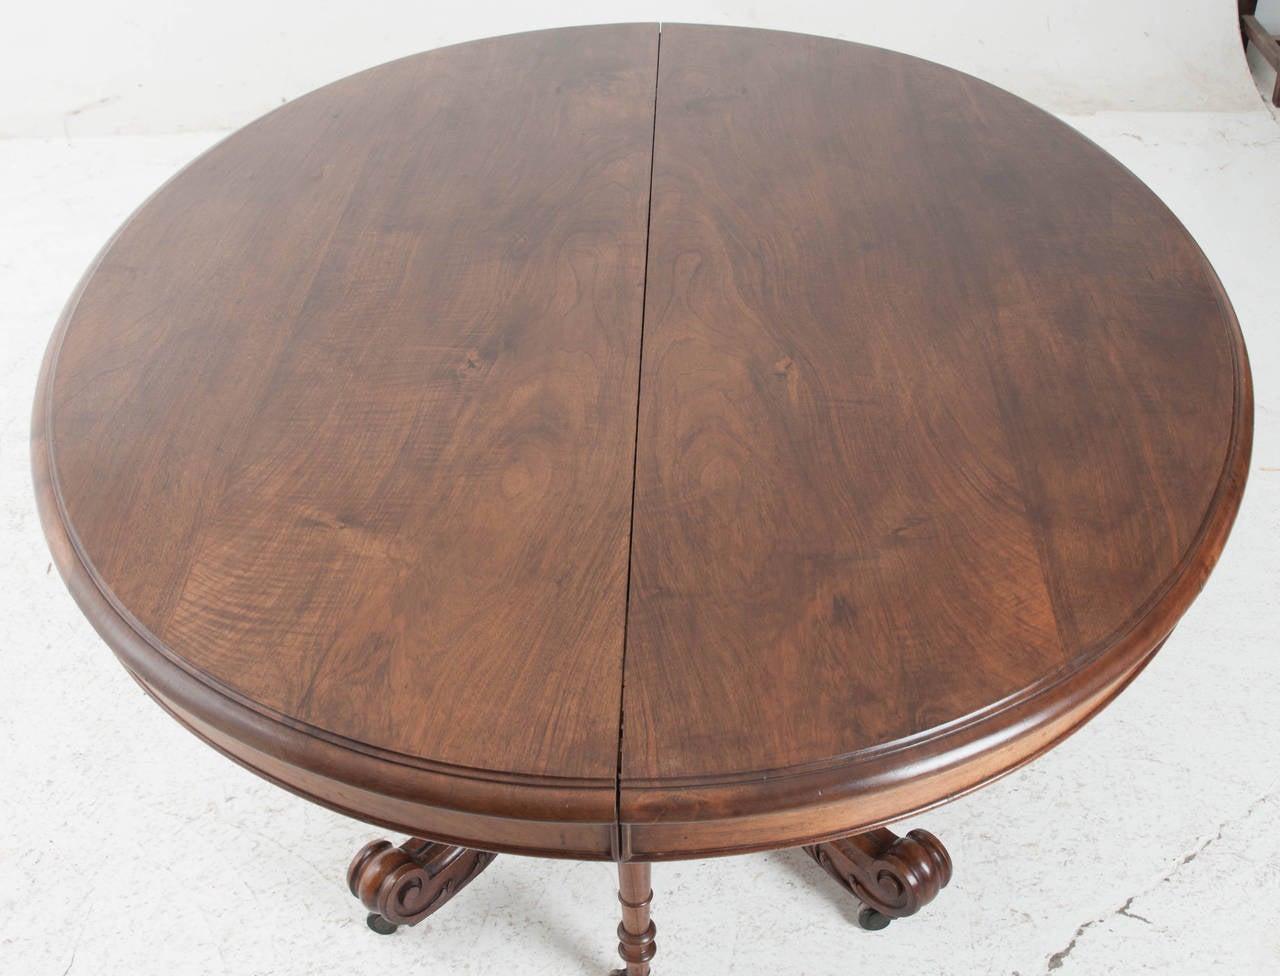 A very handsome and intriguing pedestal dining table extending up to14'-6